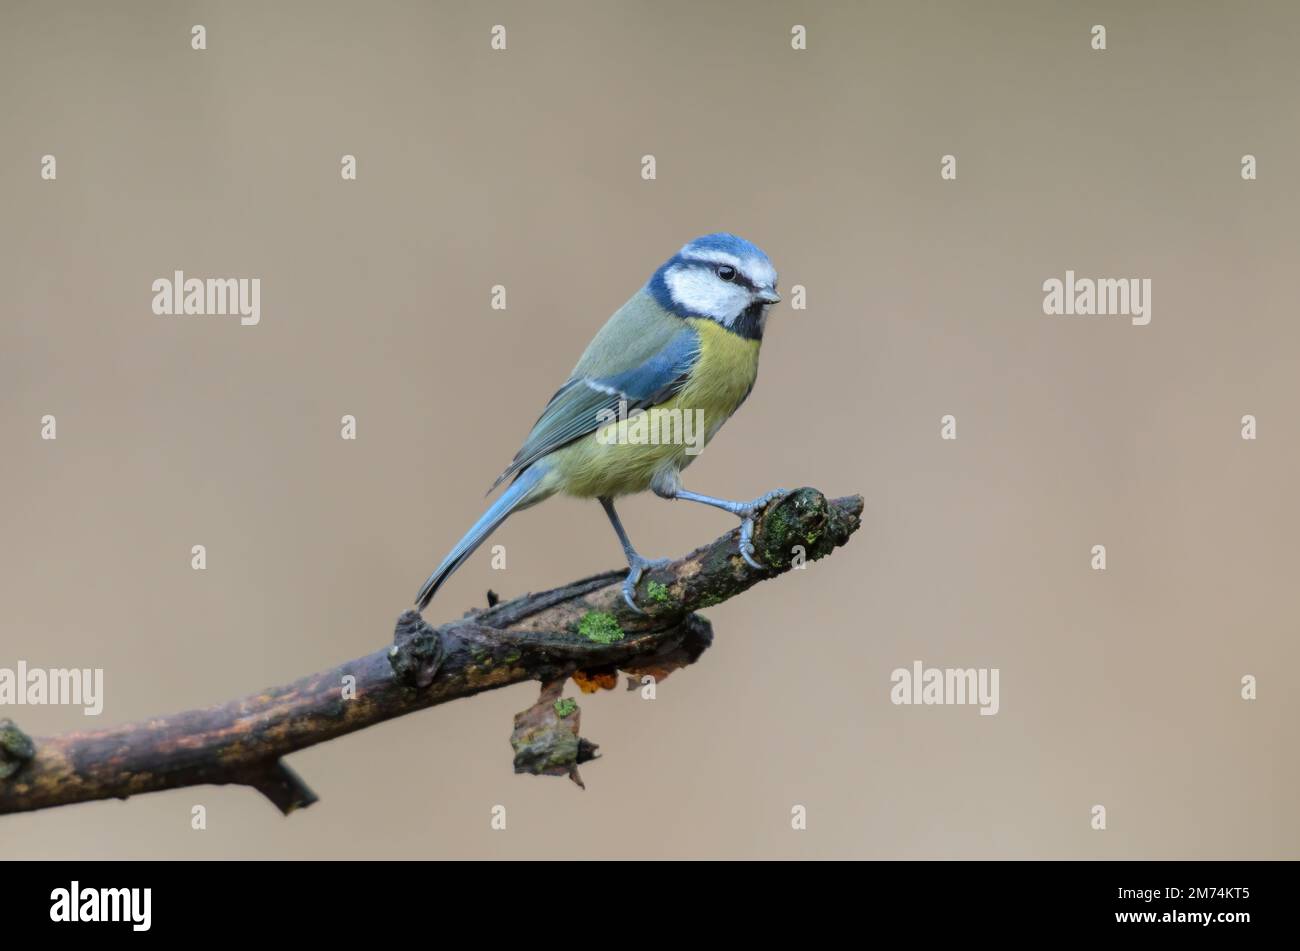 Blue Tit, Cyanistes Caeruleus, perched on a tree branch against a blurred background. Winter. Stock Photo